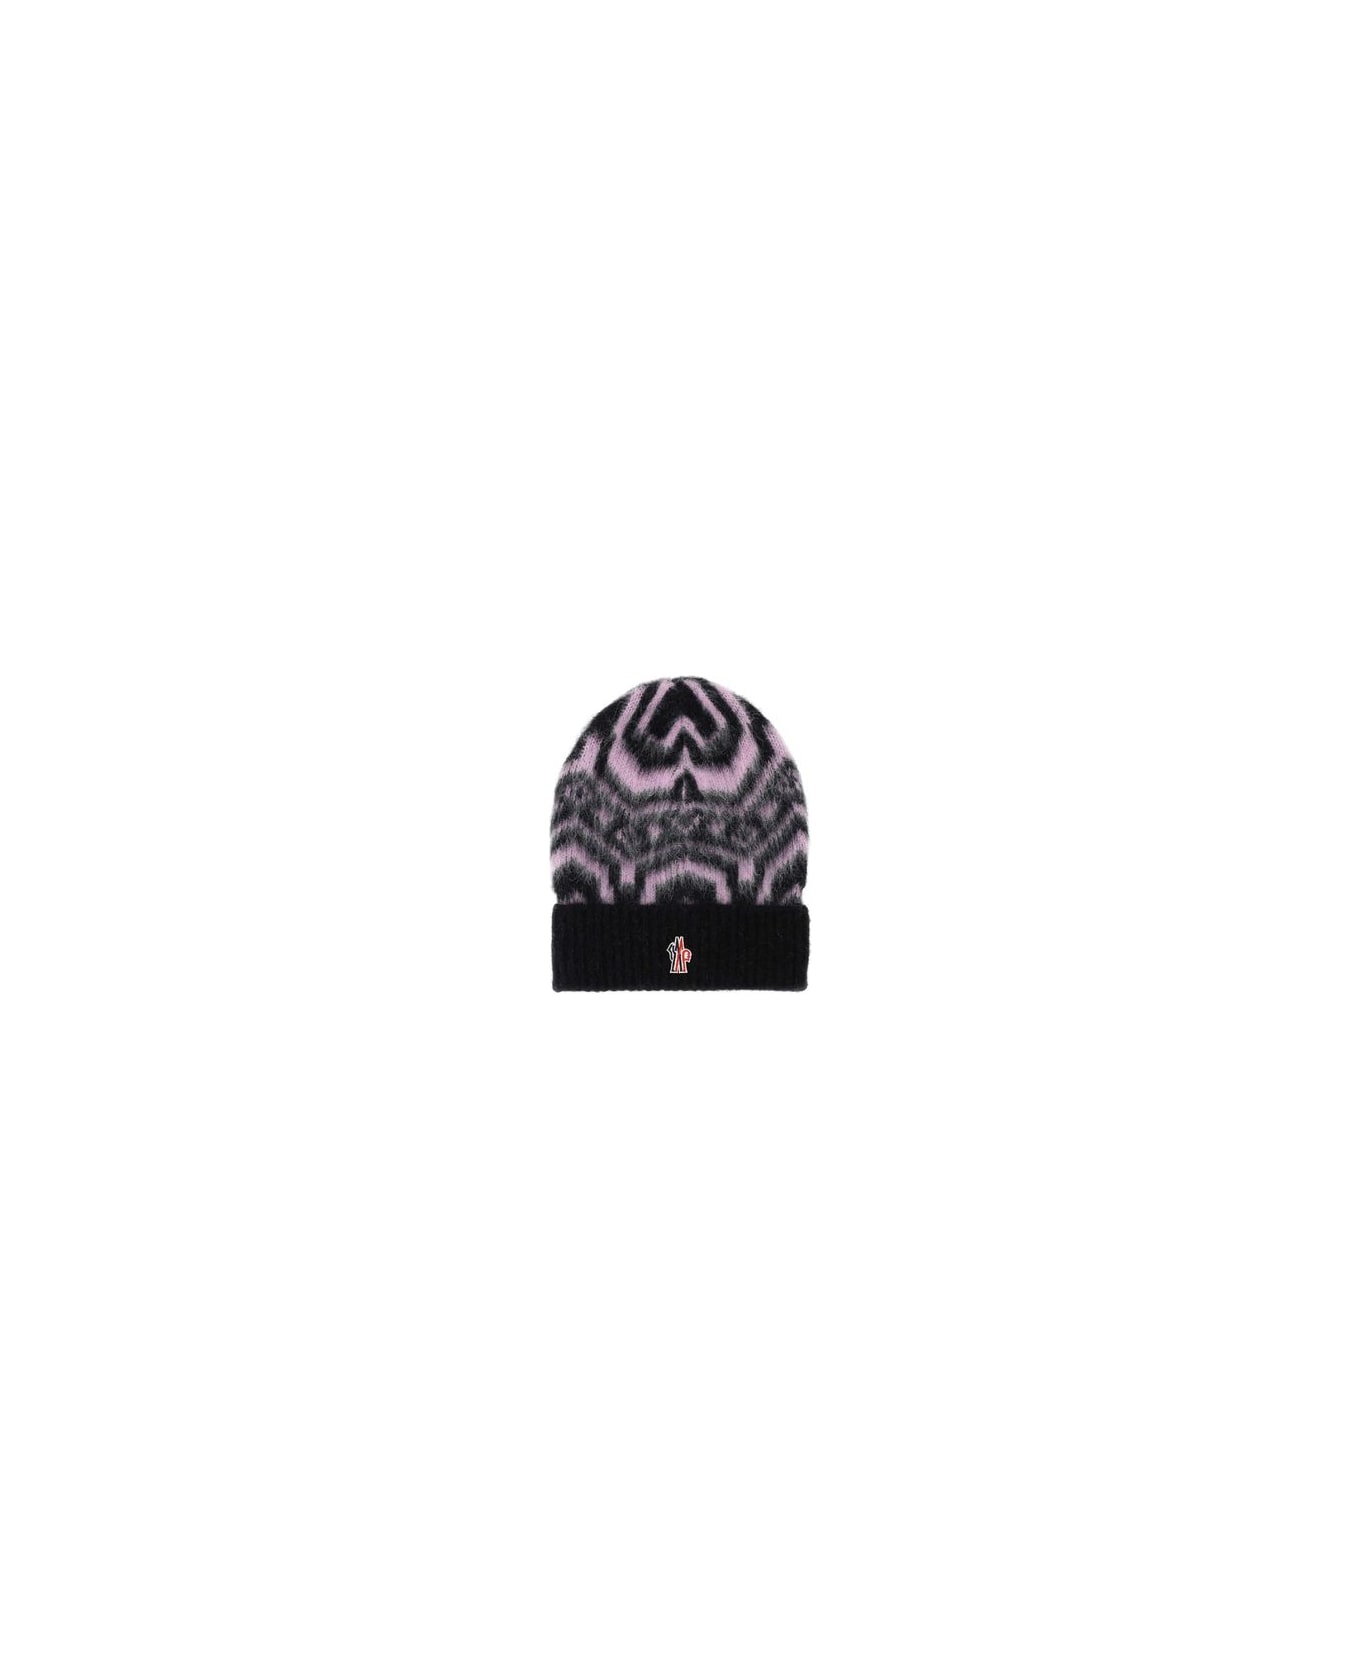 Moncler Grenoble Logo Patch Ribbed Beanie - MultiColour 帽子